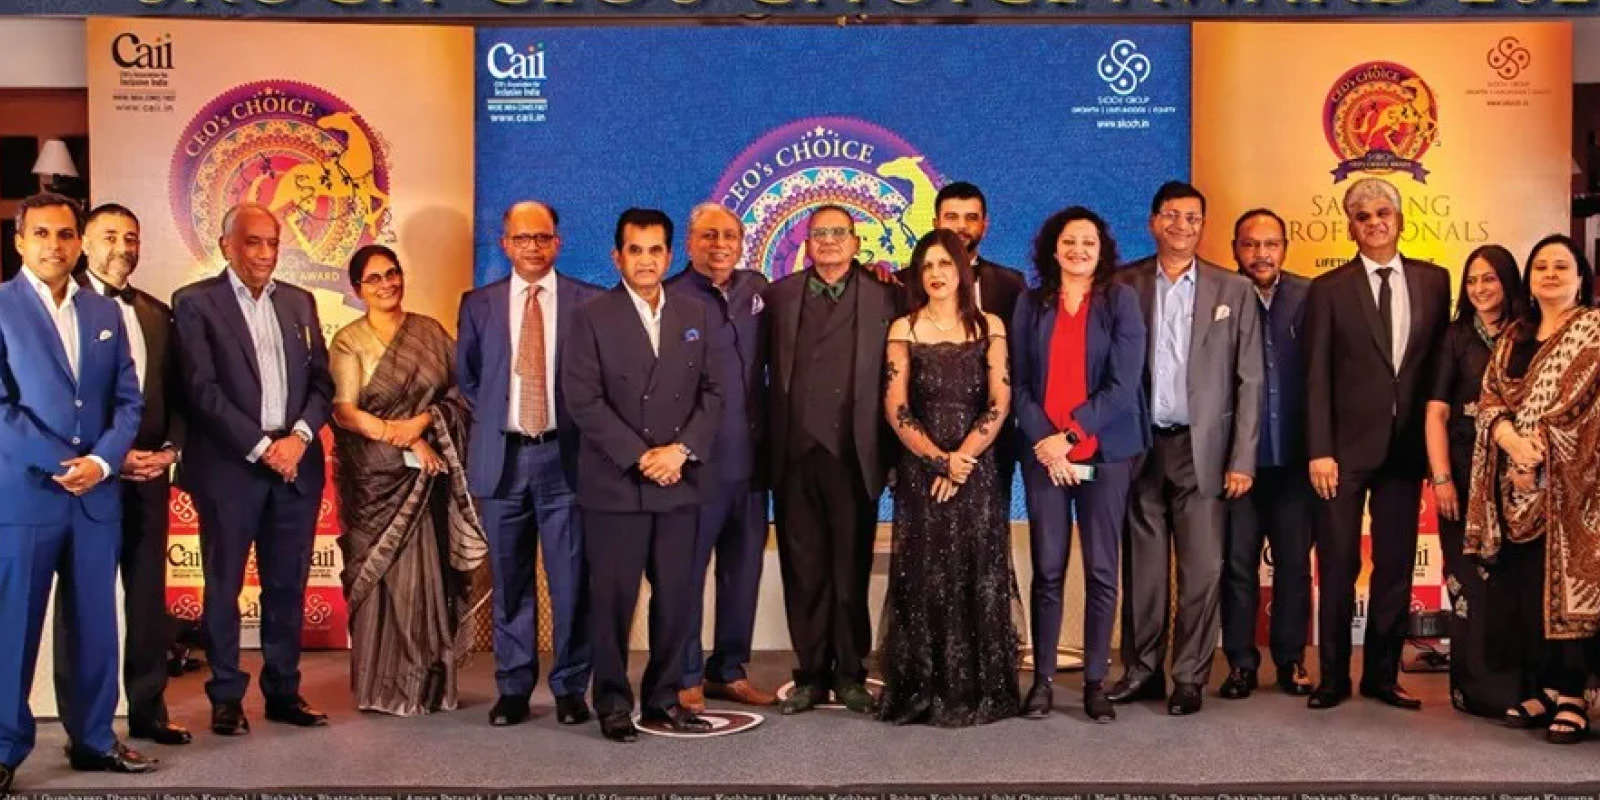 CAII Annual Dinner and Awards 2021